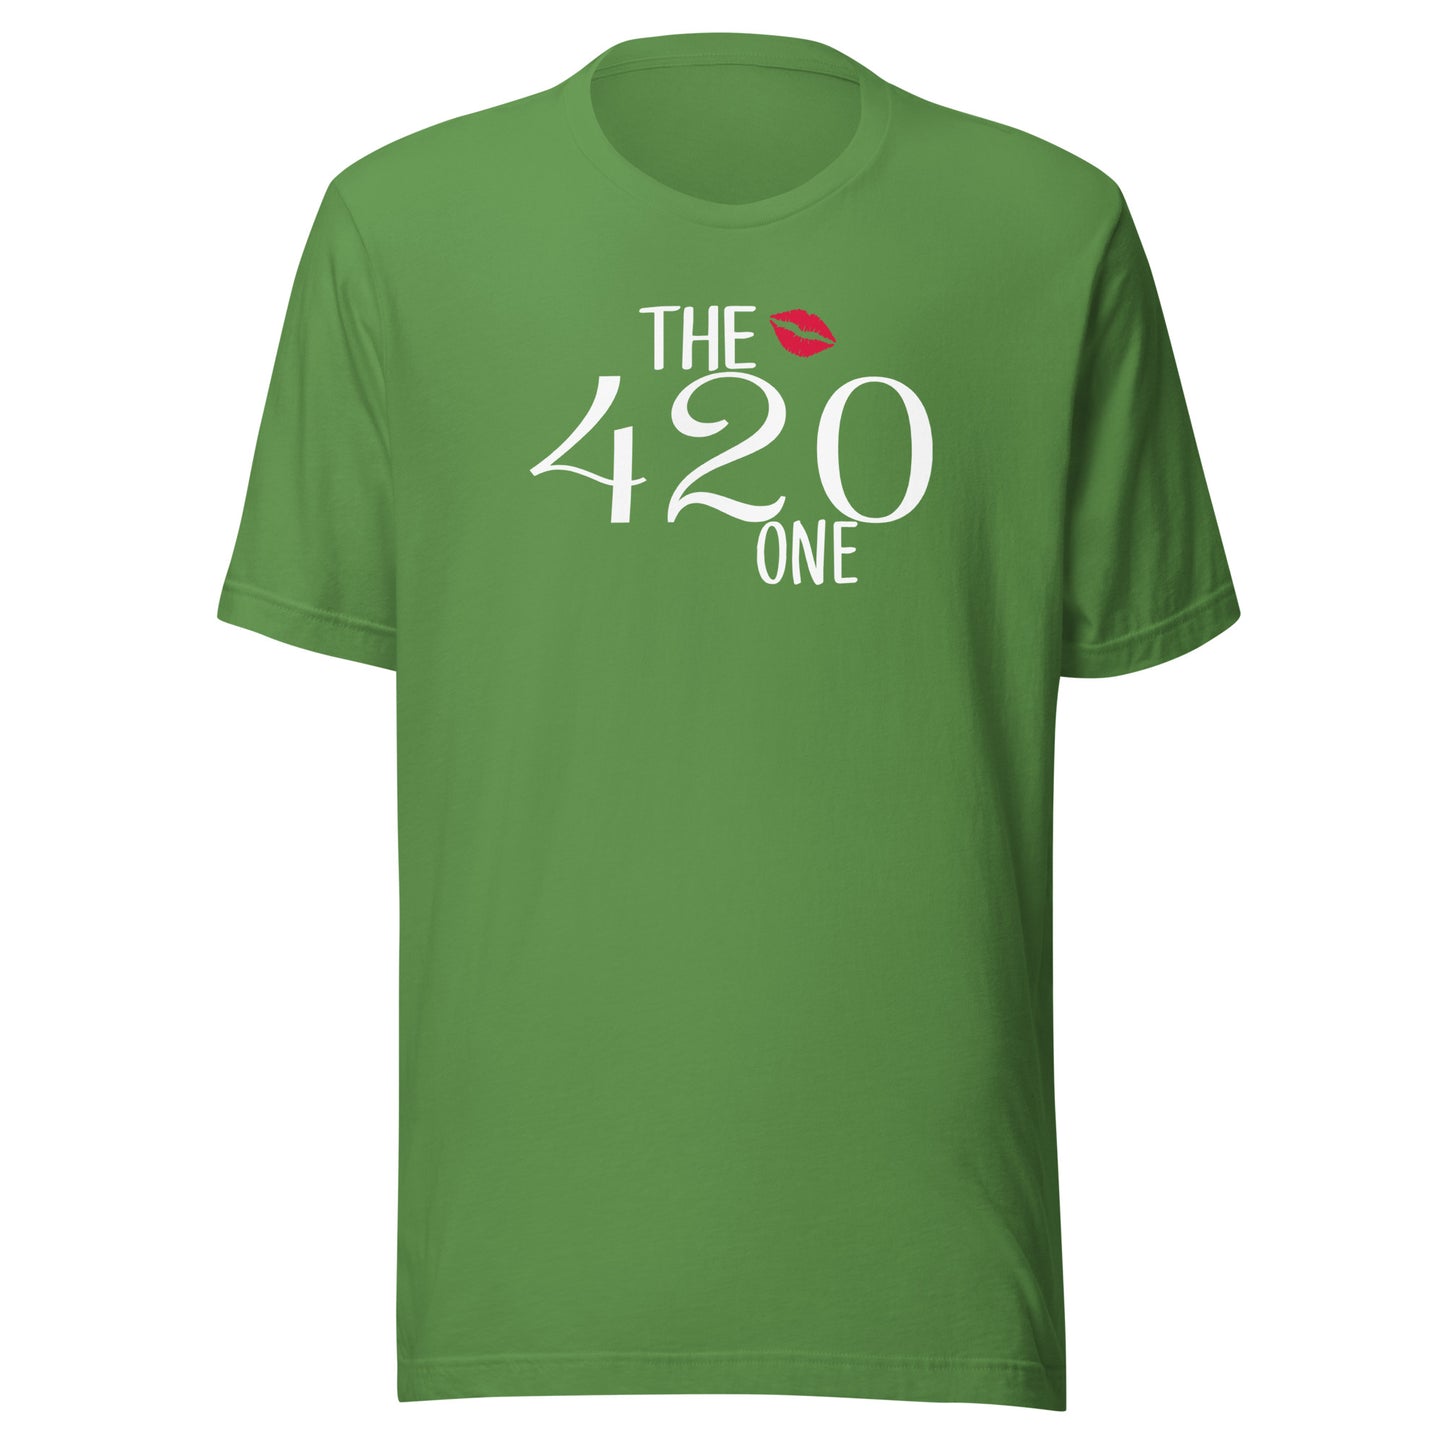 Small -  Medium The 420 One (white letters)